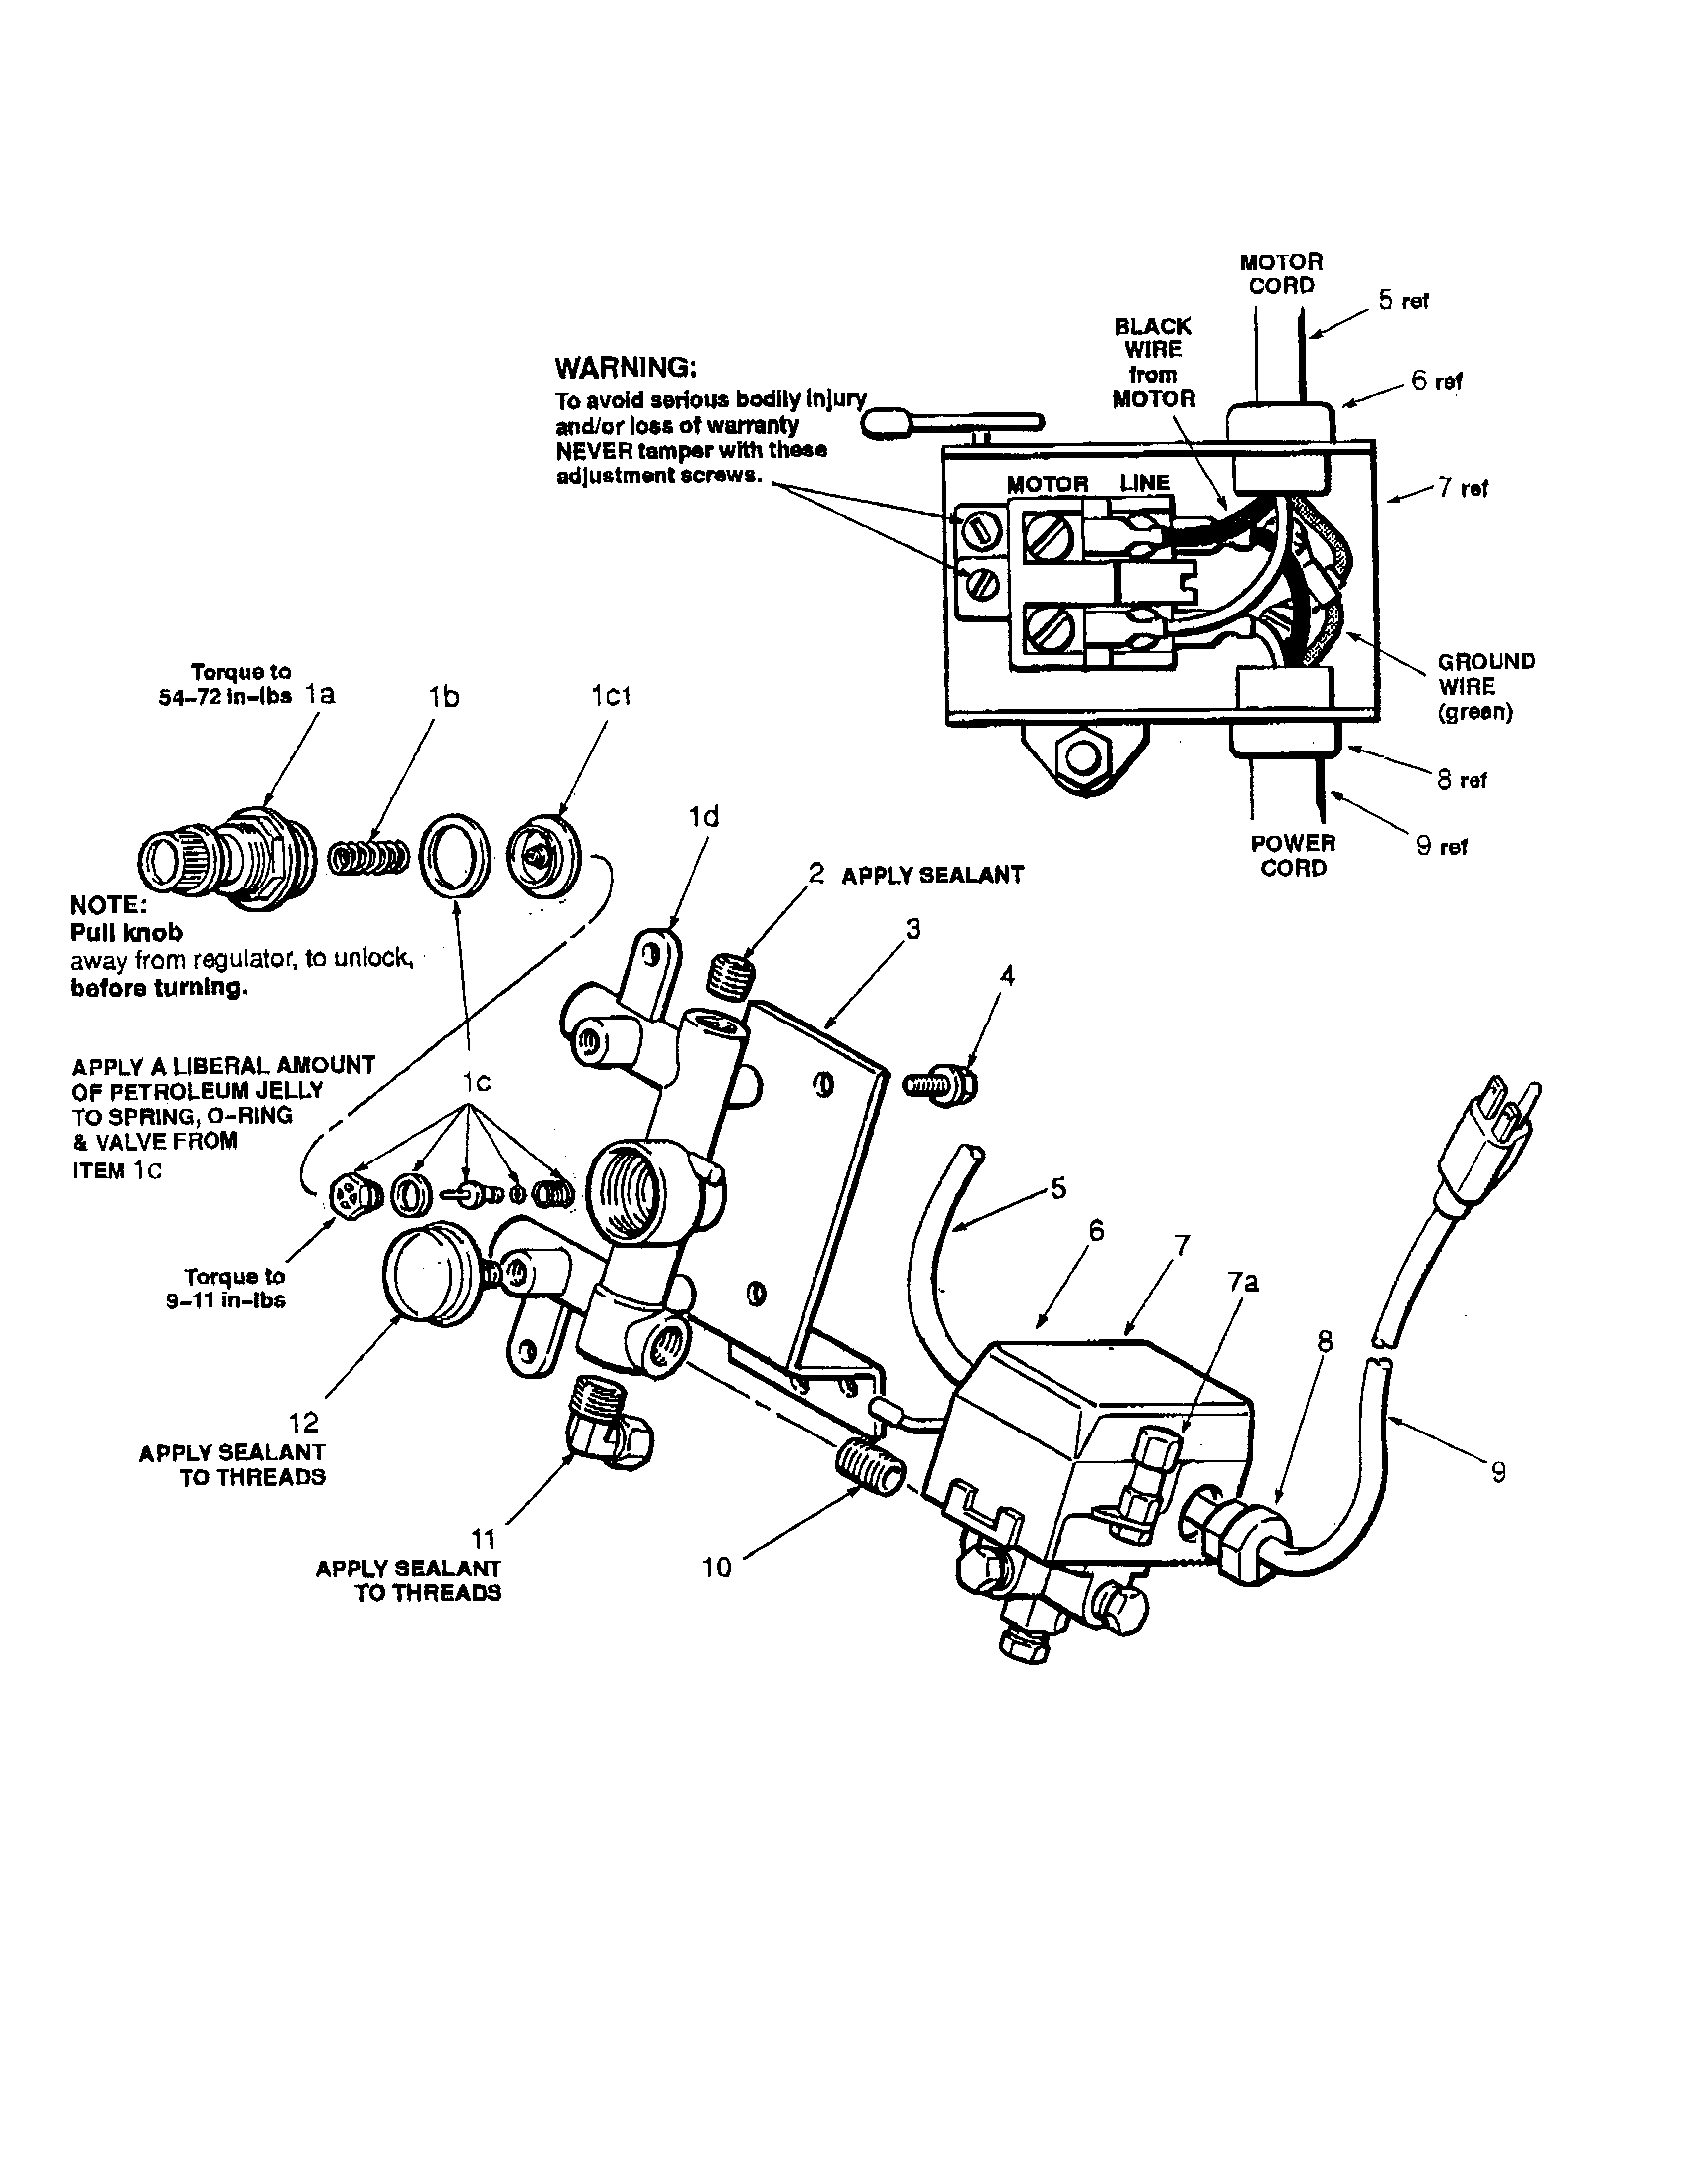 Wiring Diagram For Air Compressor Pressure Switch from c.searspartsdirect.com